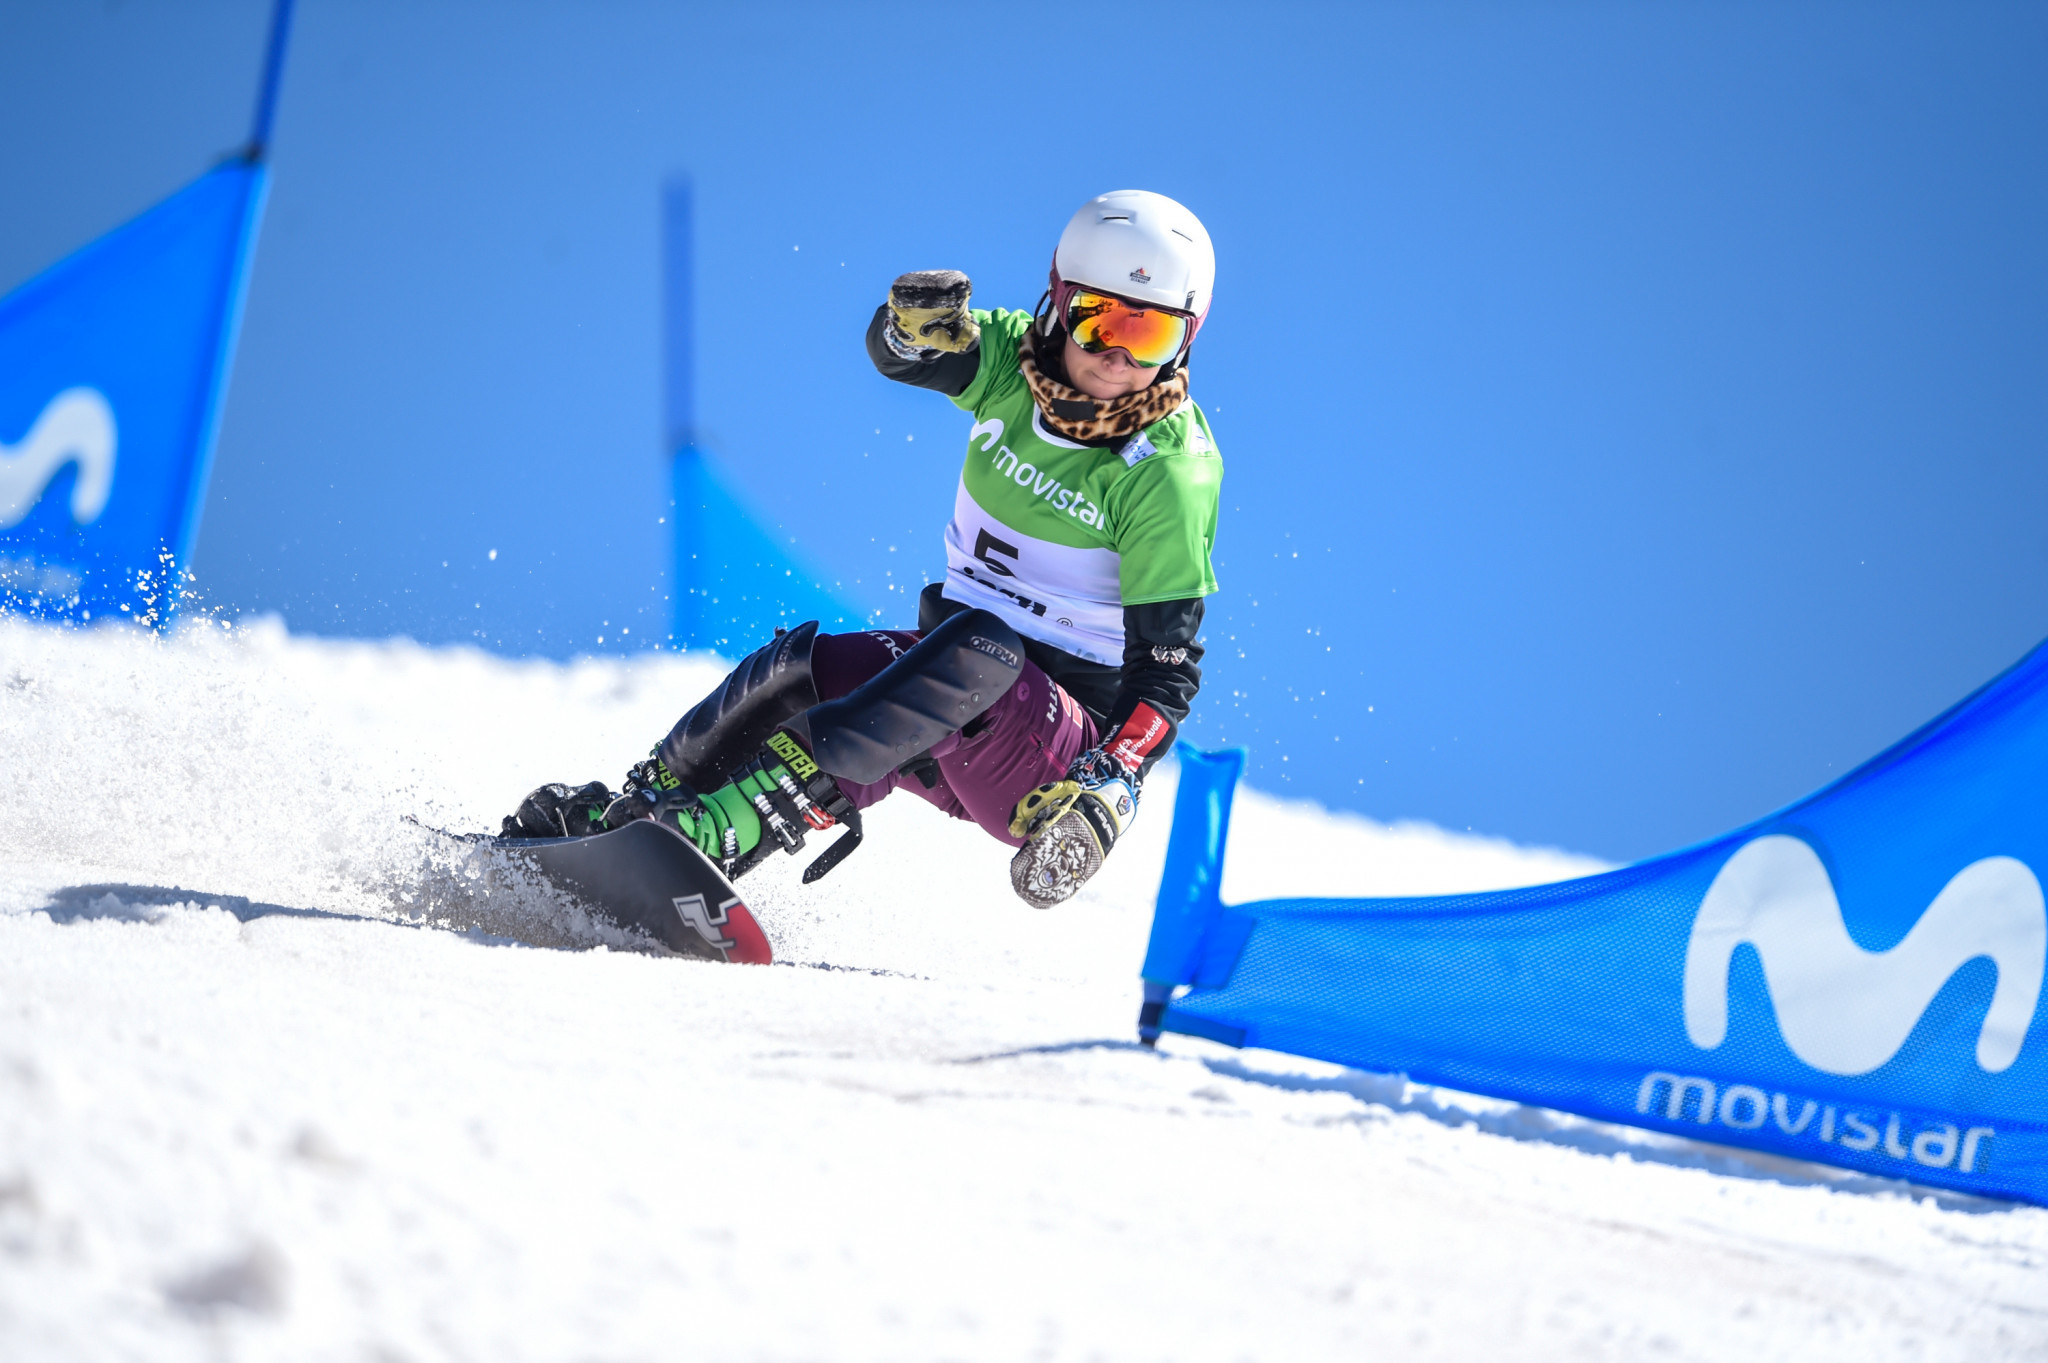 Ramona Theresia Hofmeister won a gold medal at the 2016 FIS Snowboard Junior World Championships ©Getty Images